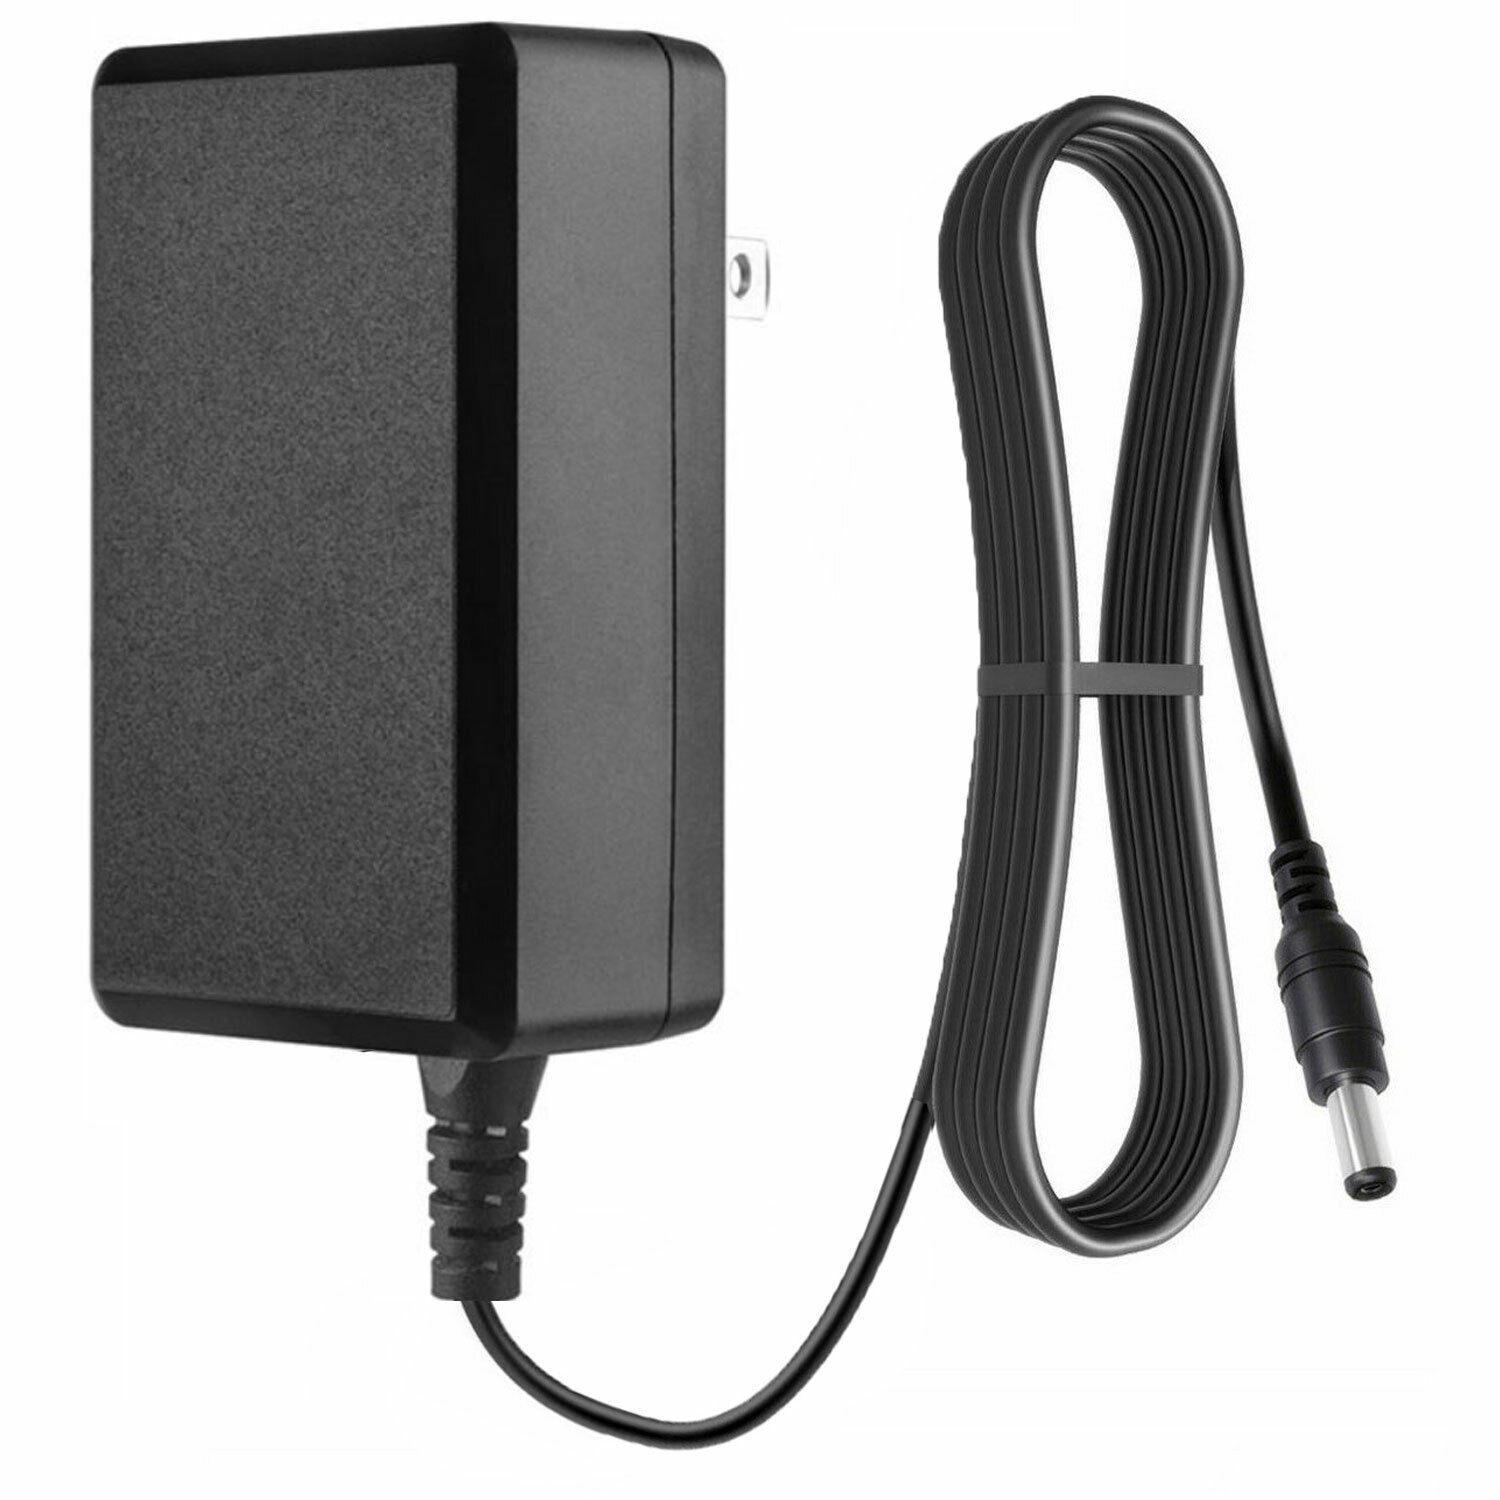 AC Adapter For Shark UM205 VC205 VM200C VACMOP Vacuum Mop Power Supply Charger Country/Region of Ma